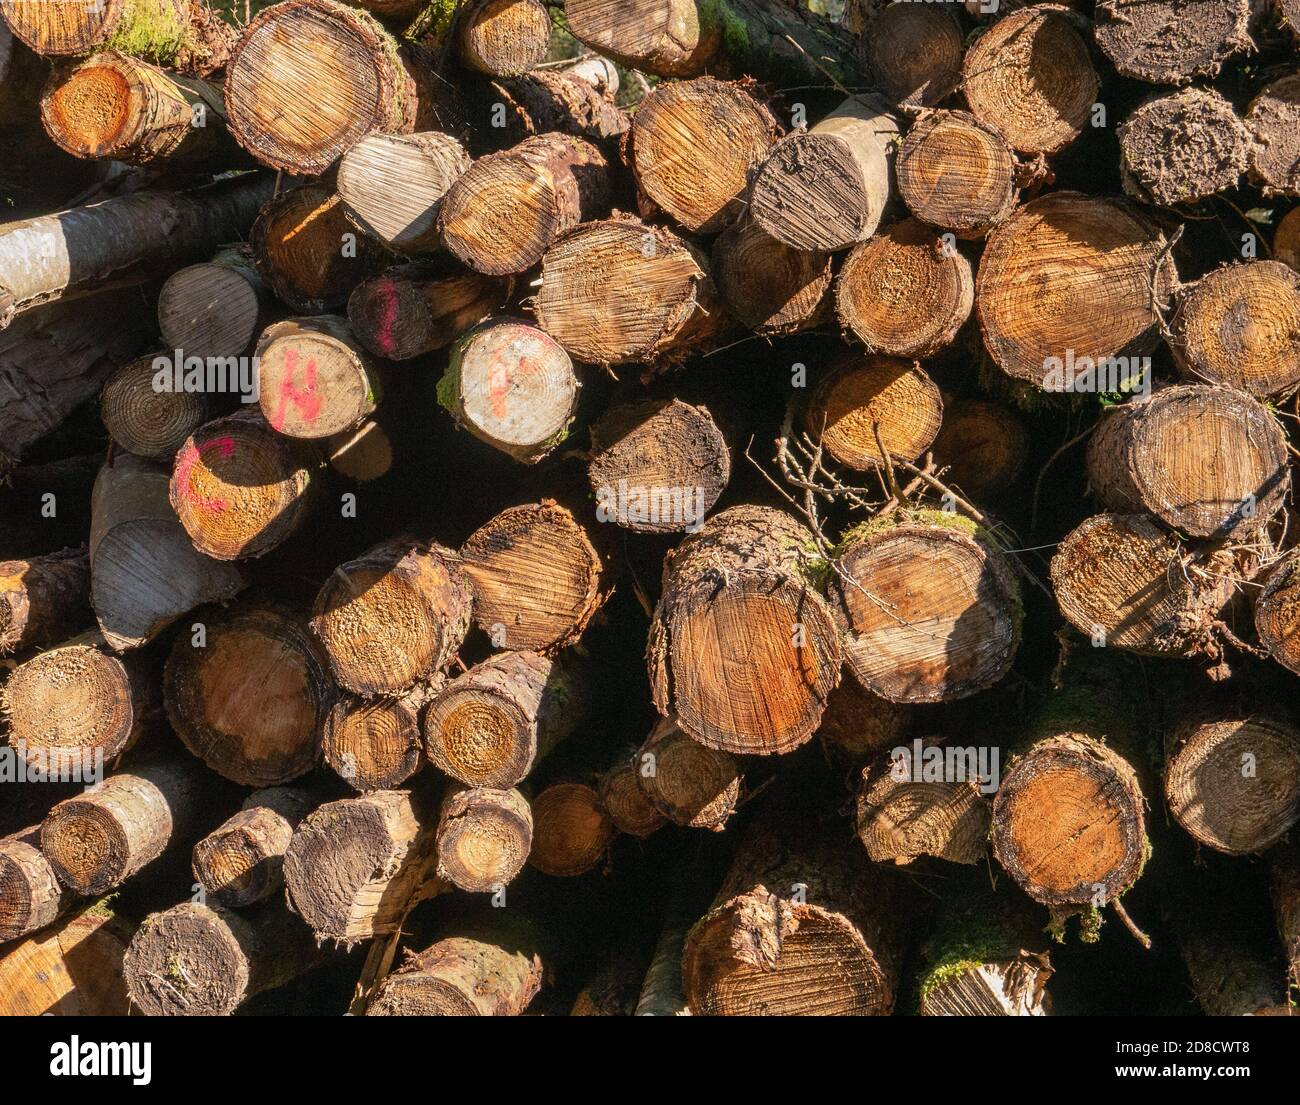 A stack of logs on a forestry tree felling site Stock Photo